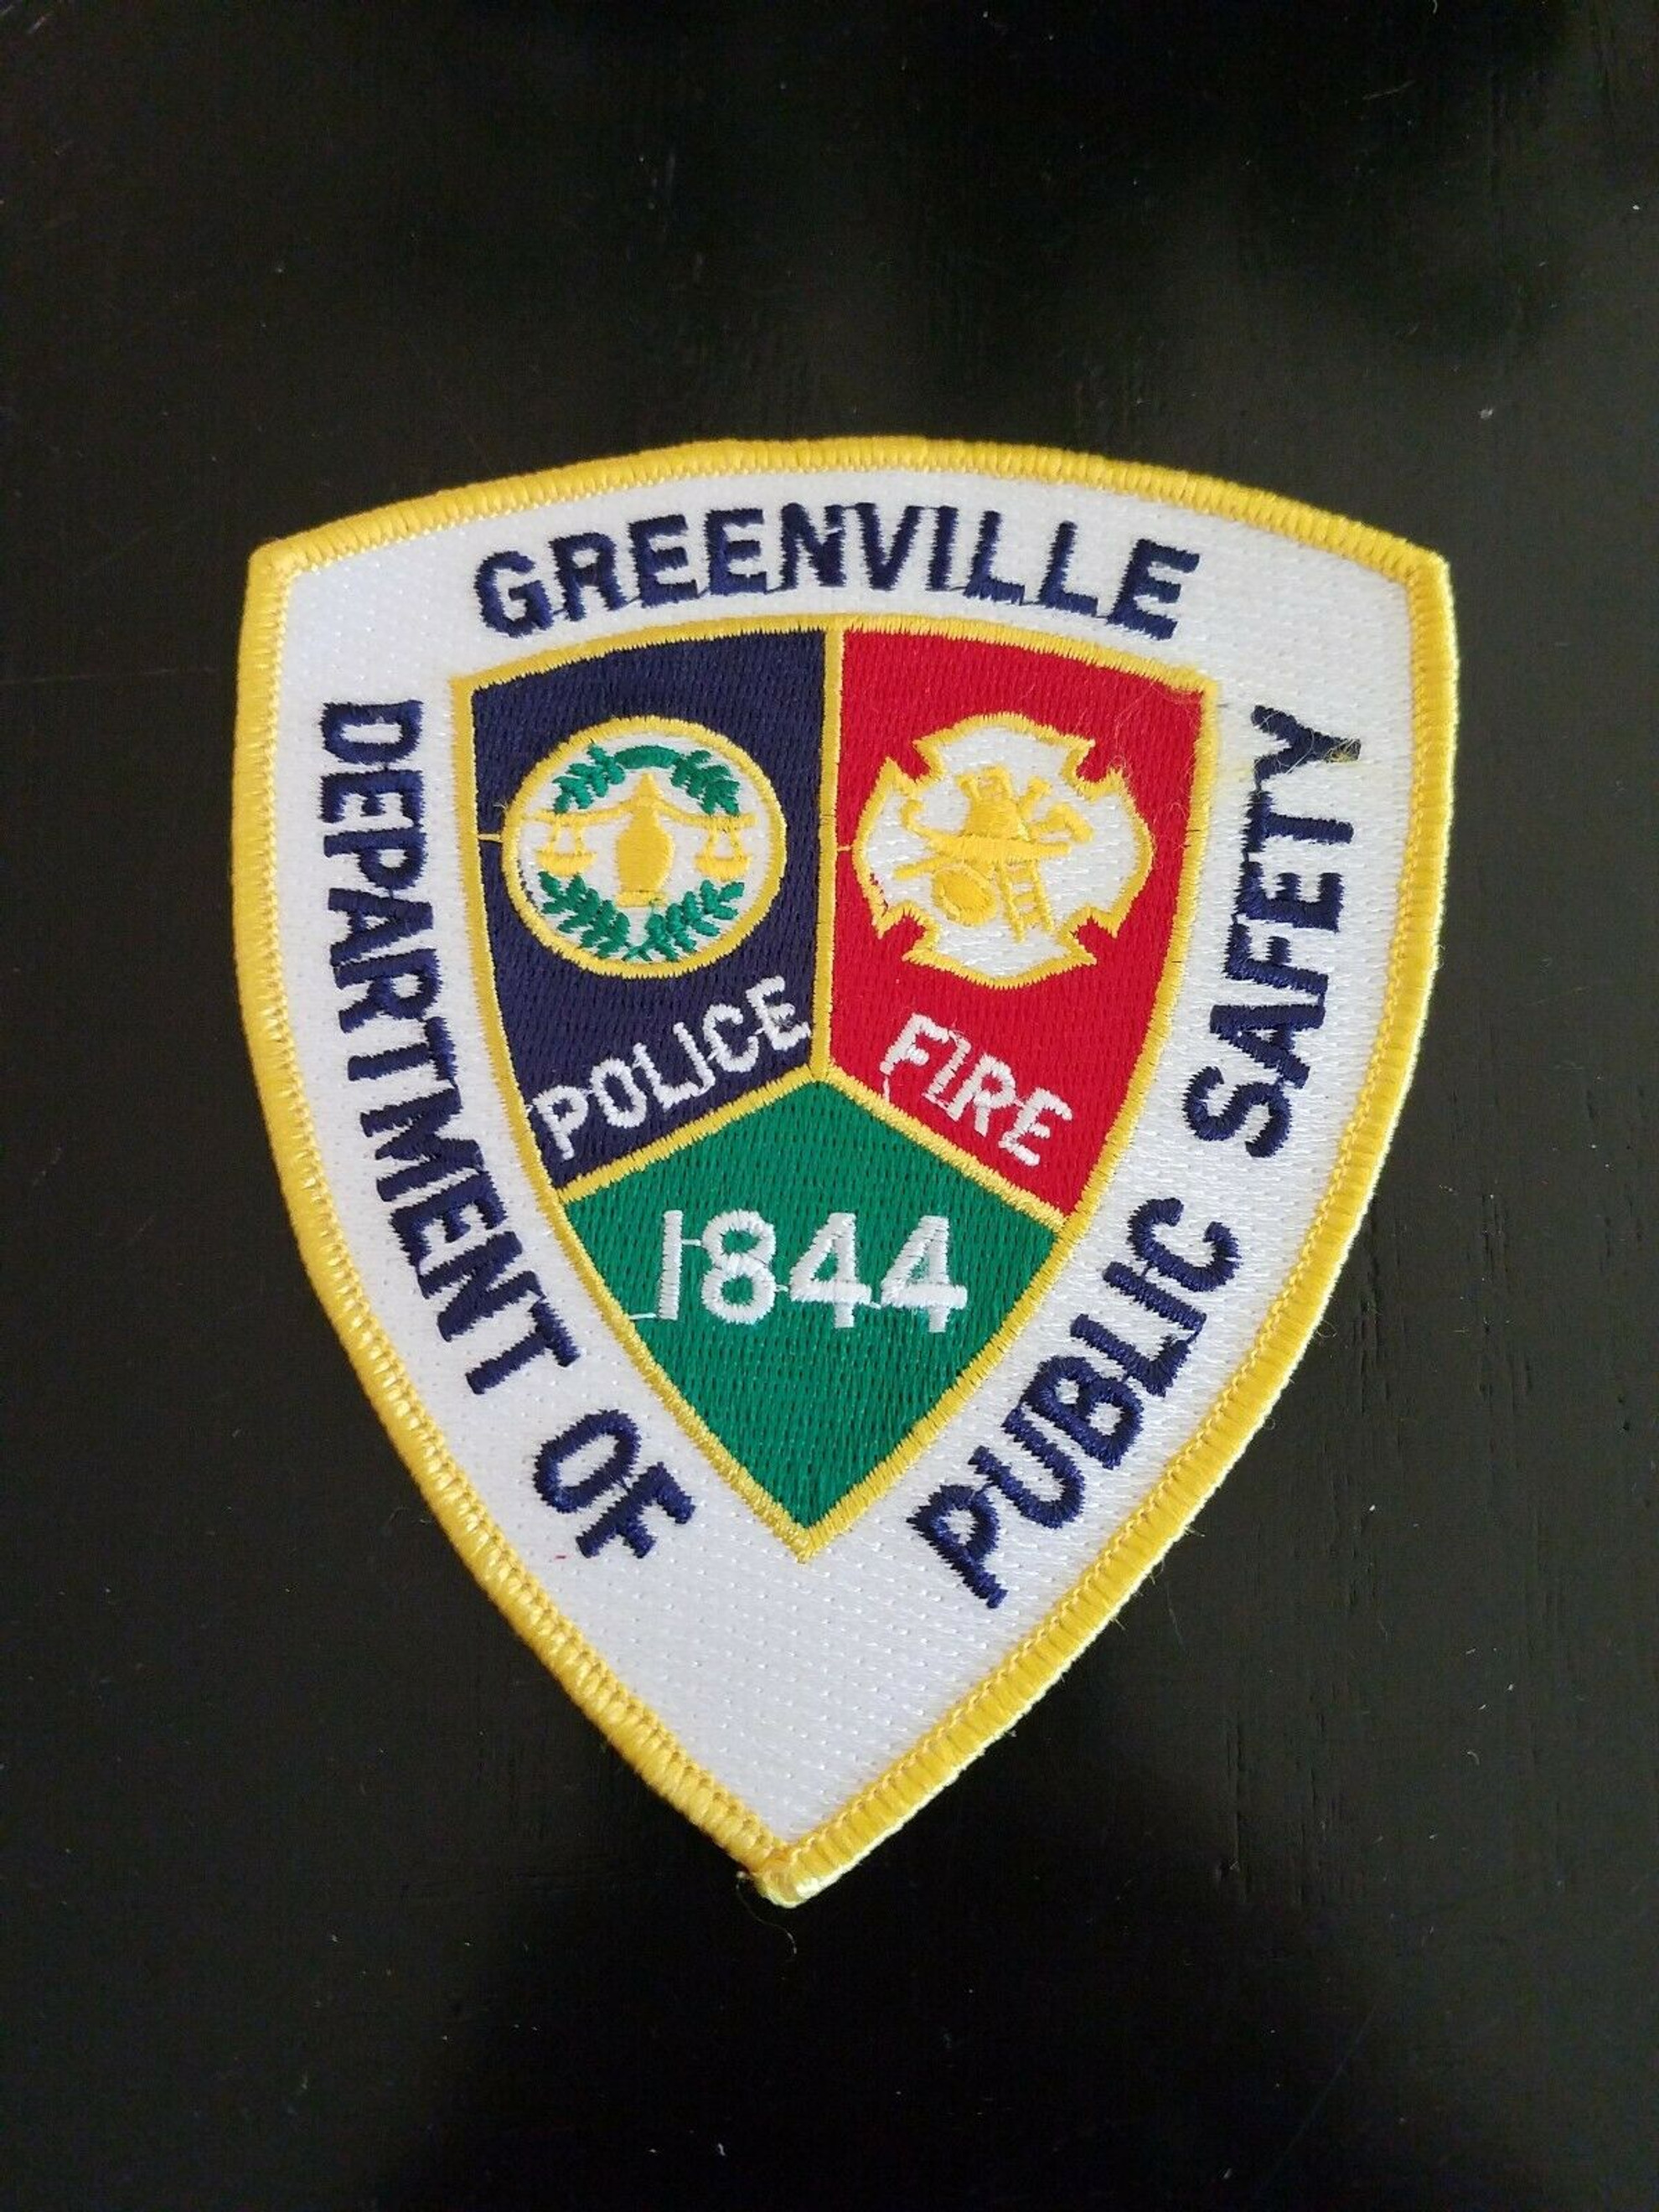 Greenville Department of Public Safety SC Police Patch